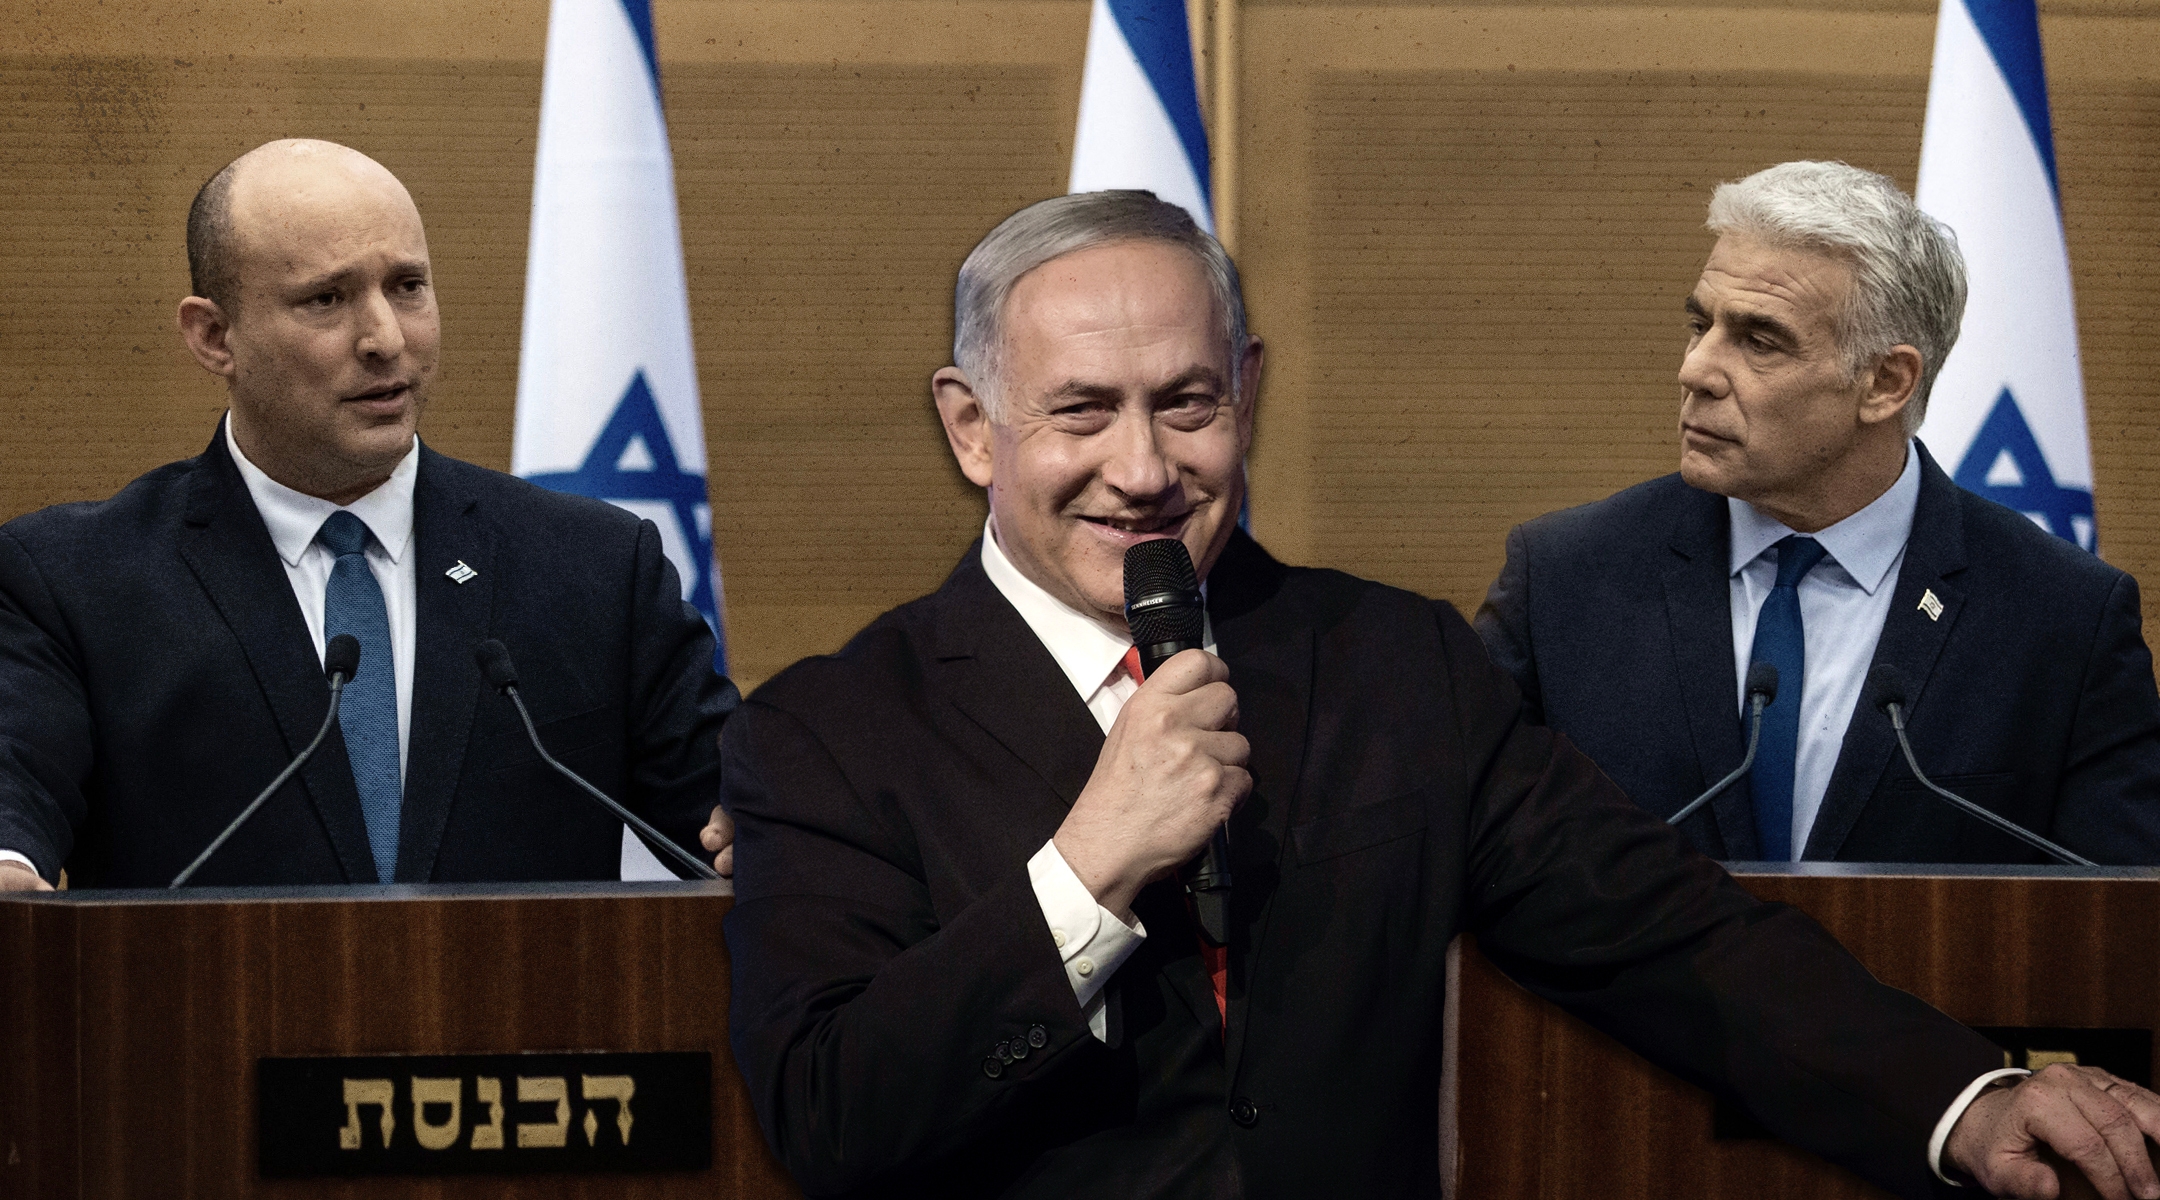  A 5th Israeli election in 3 years? Here’s how we got here and what happens...